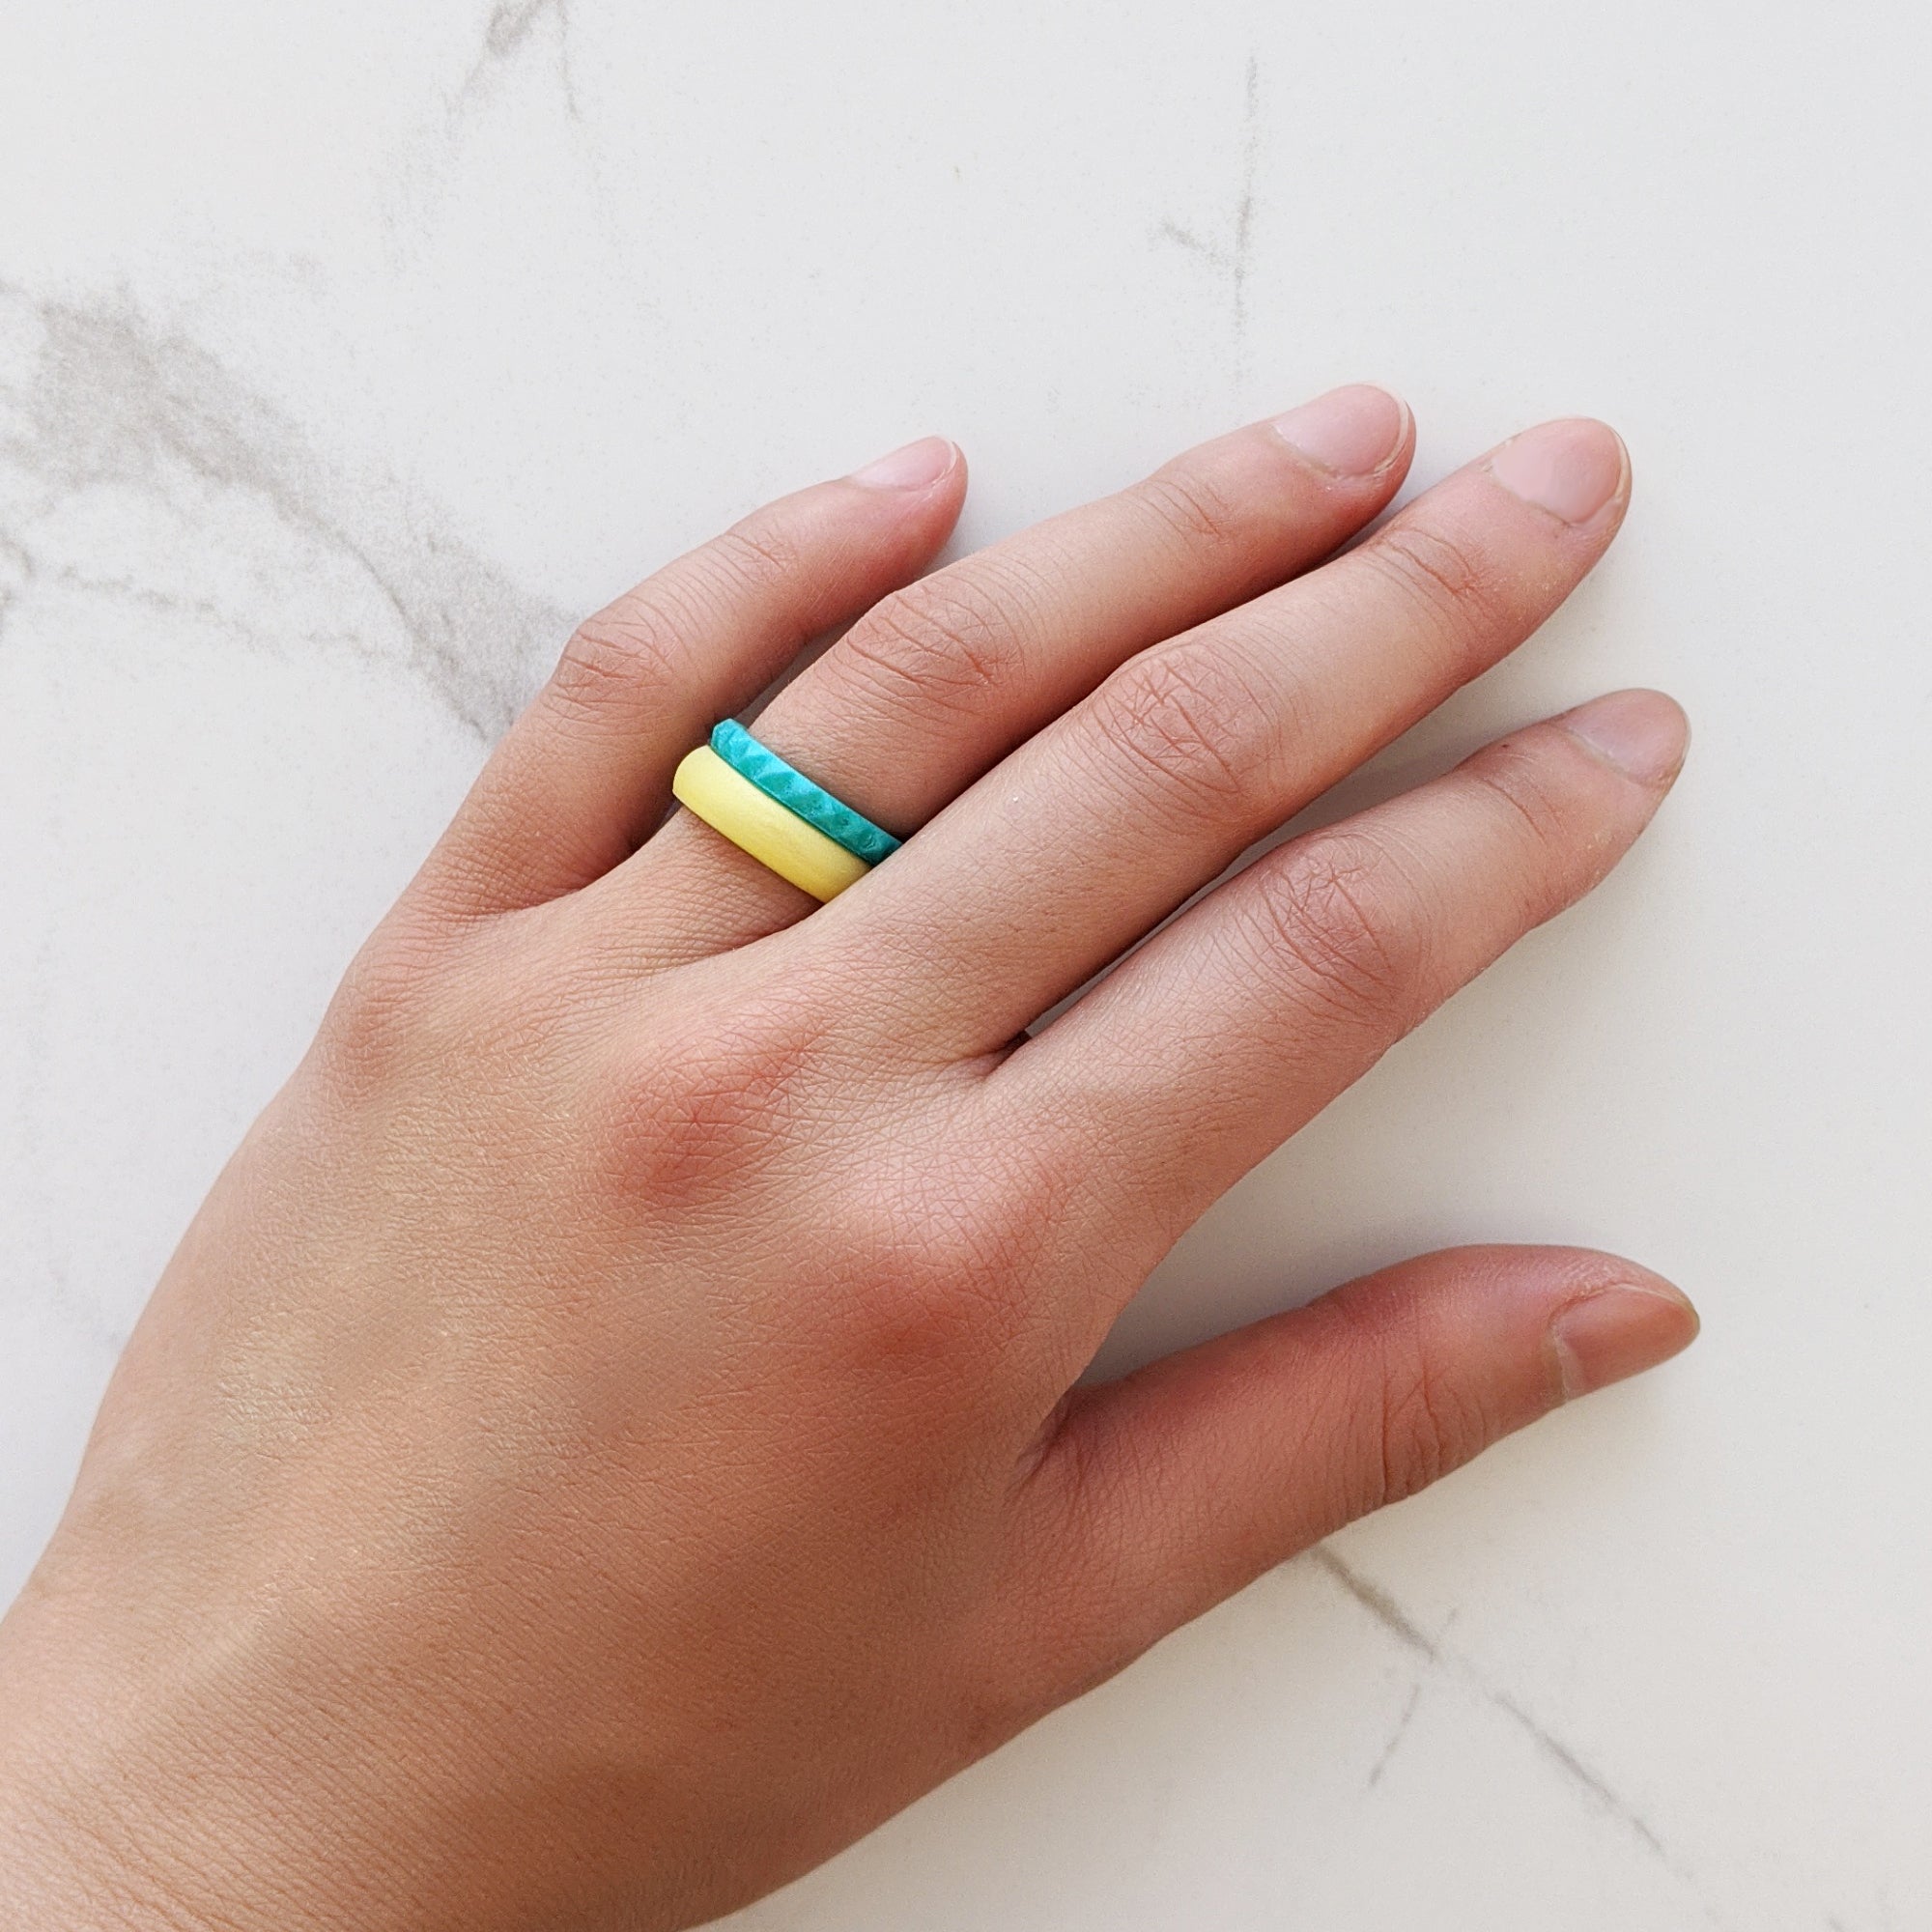 Enchanted Green Pyramid Stackable Slim Thin Silicone Ring for Women